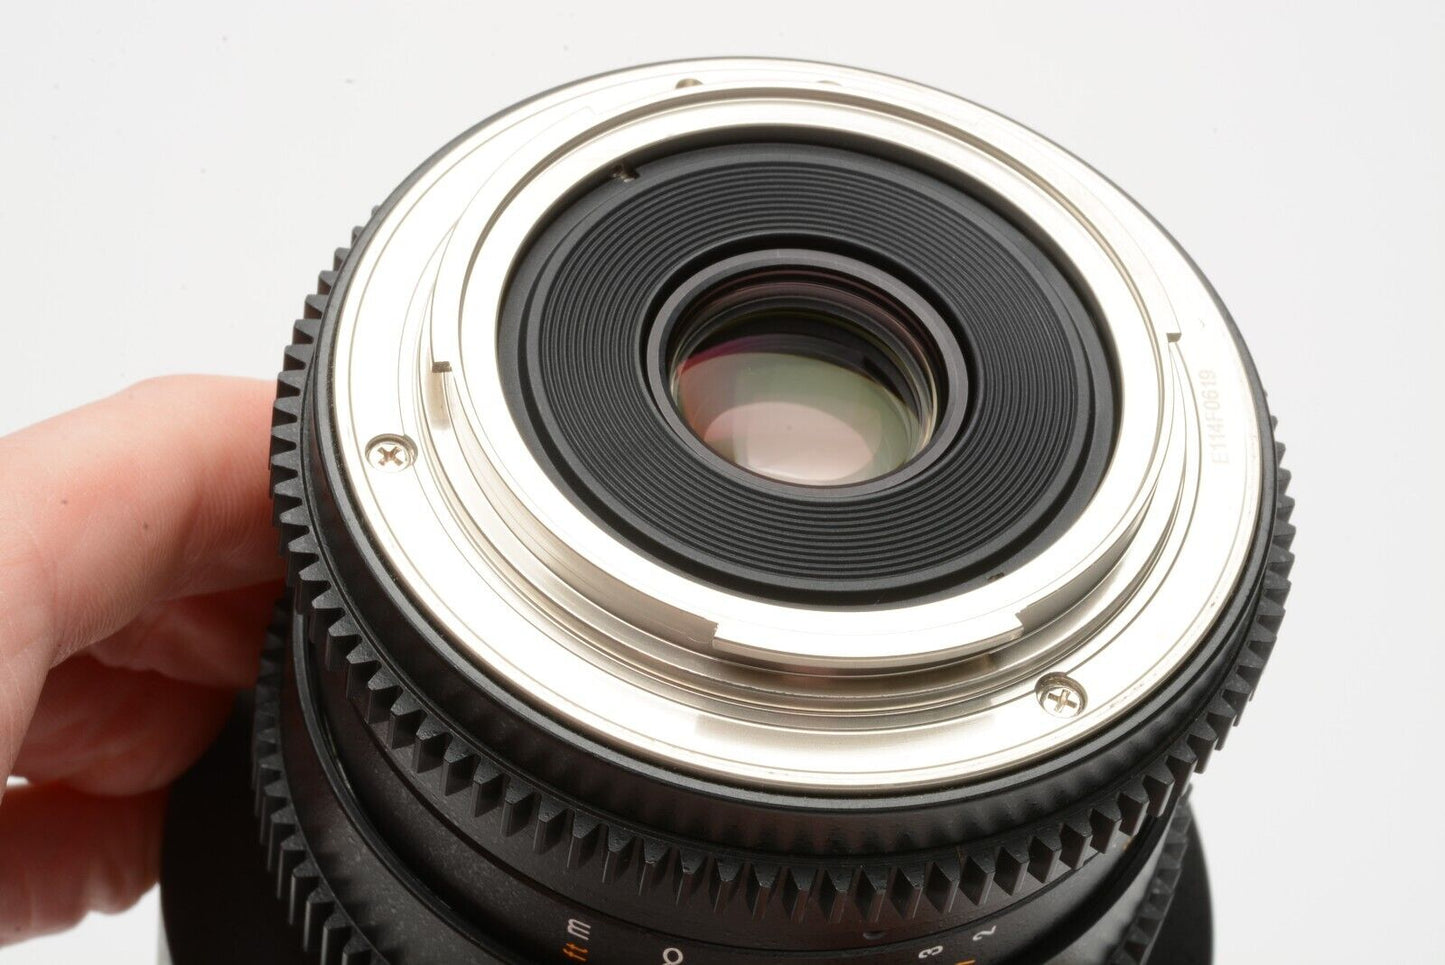 MINT- SAMYANG 14mm F2.8 ED AS IF UMC LENS, CAPS, BARELY USED, VERY NICE